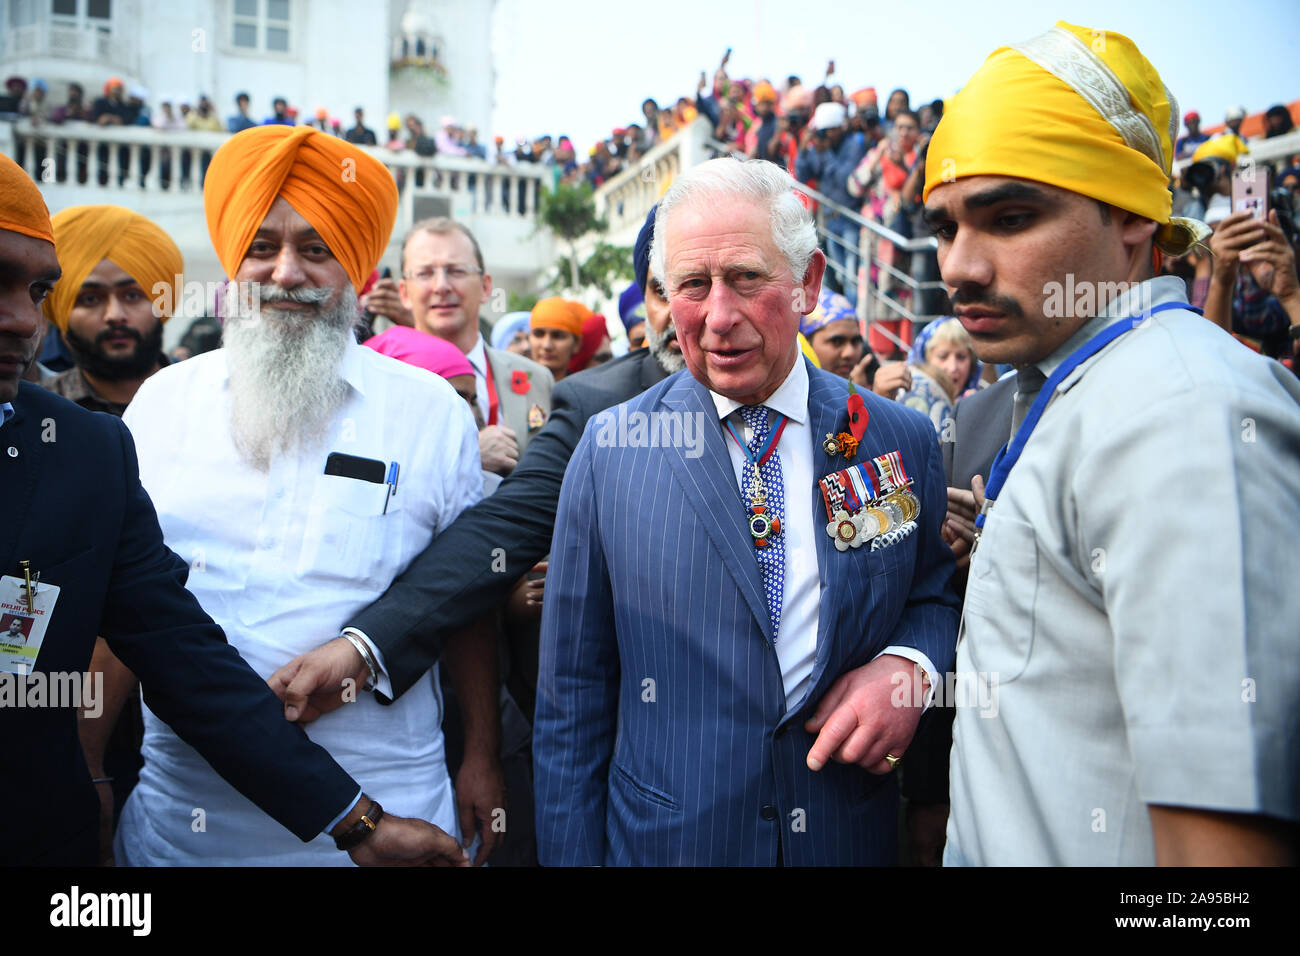 The Prince of Wales arrives at the Bangla Sahib Gurdwara Sikh Temple, New Delhi, to celebrate the 550th anniversary of the birth of Guru Nanak, the founder of Sikhism, on day one of the royal visit to India. Stock Photo